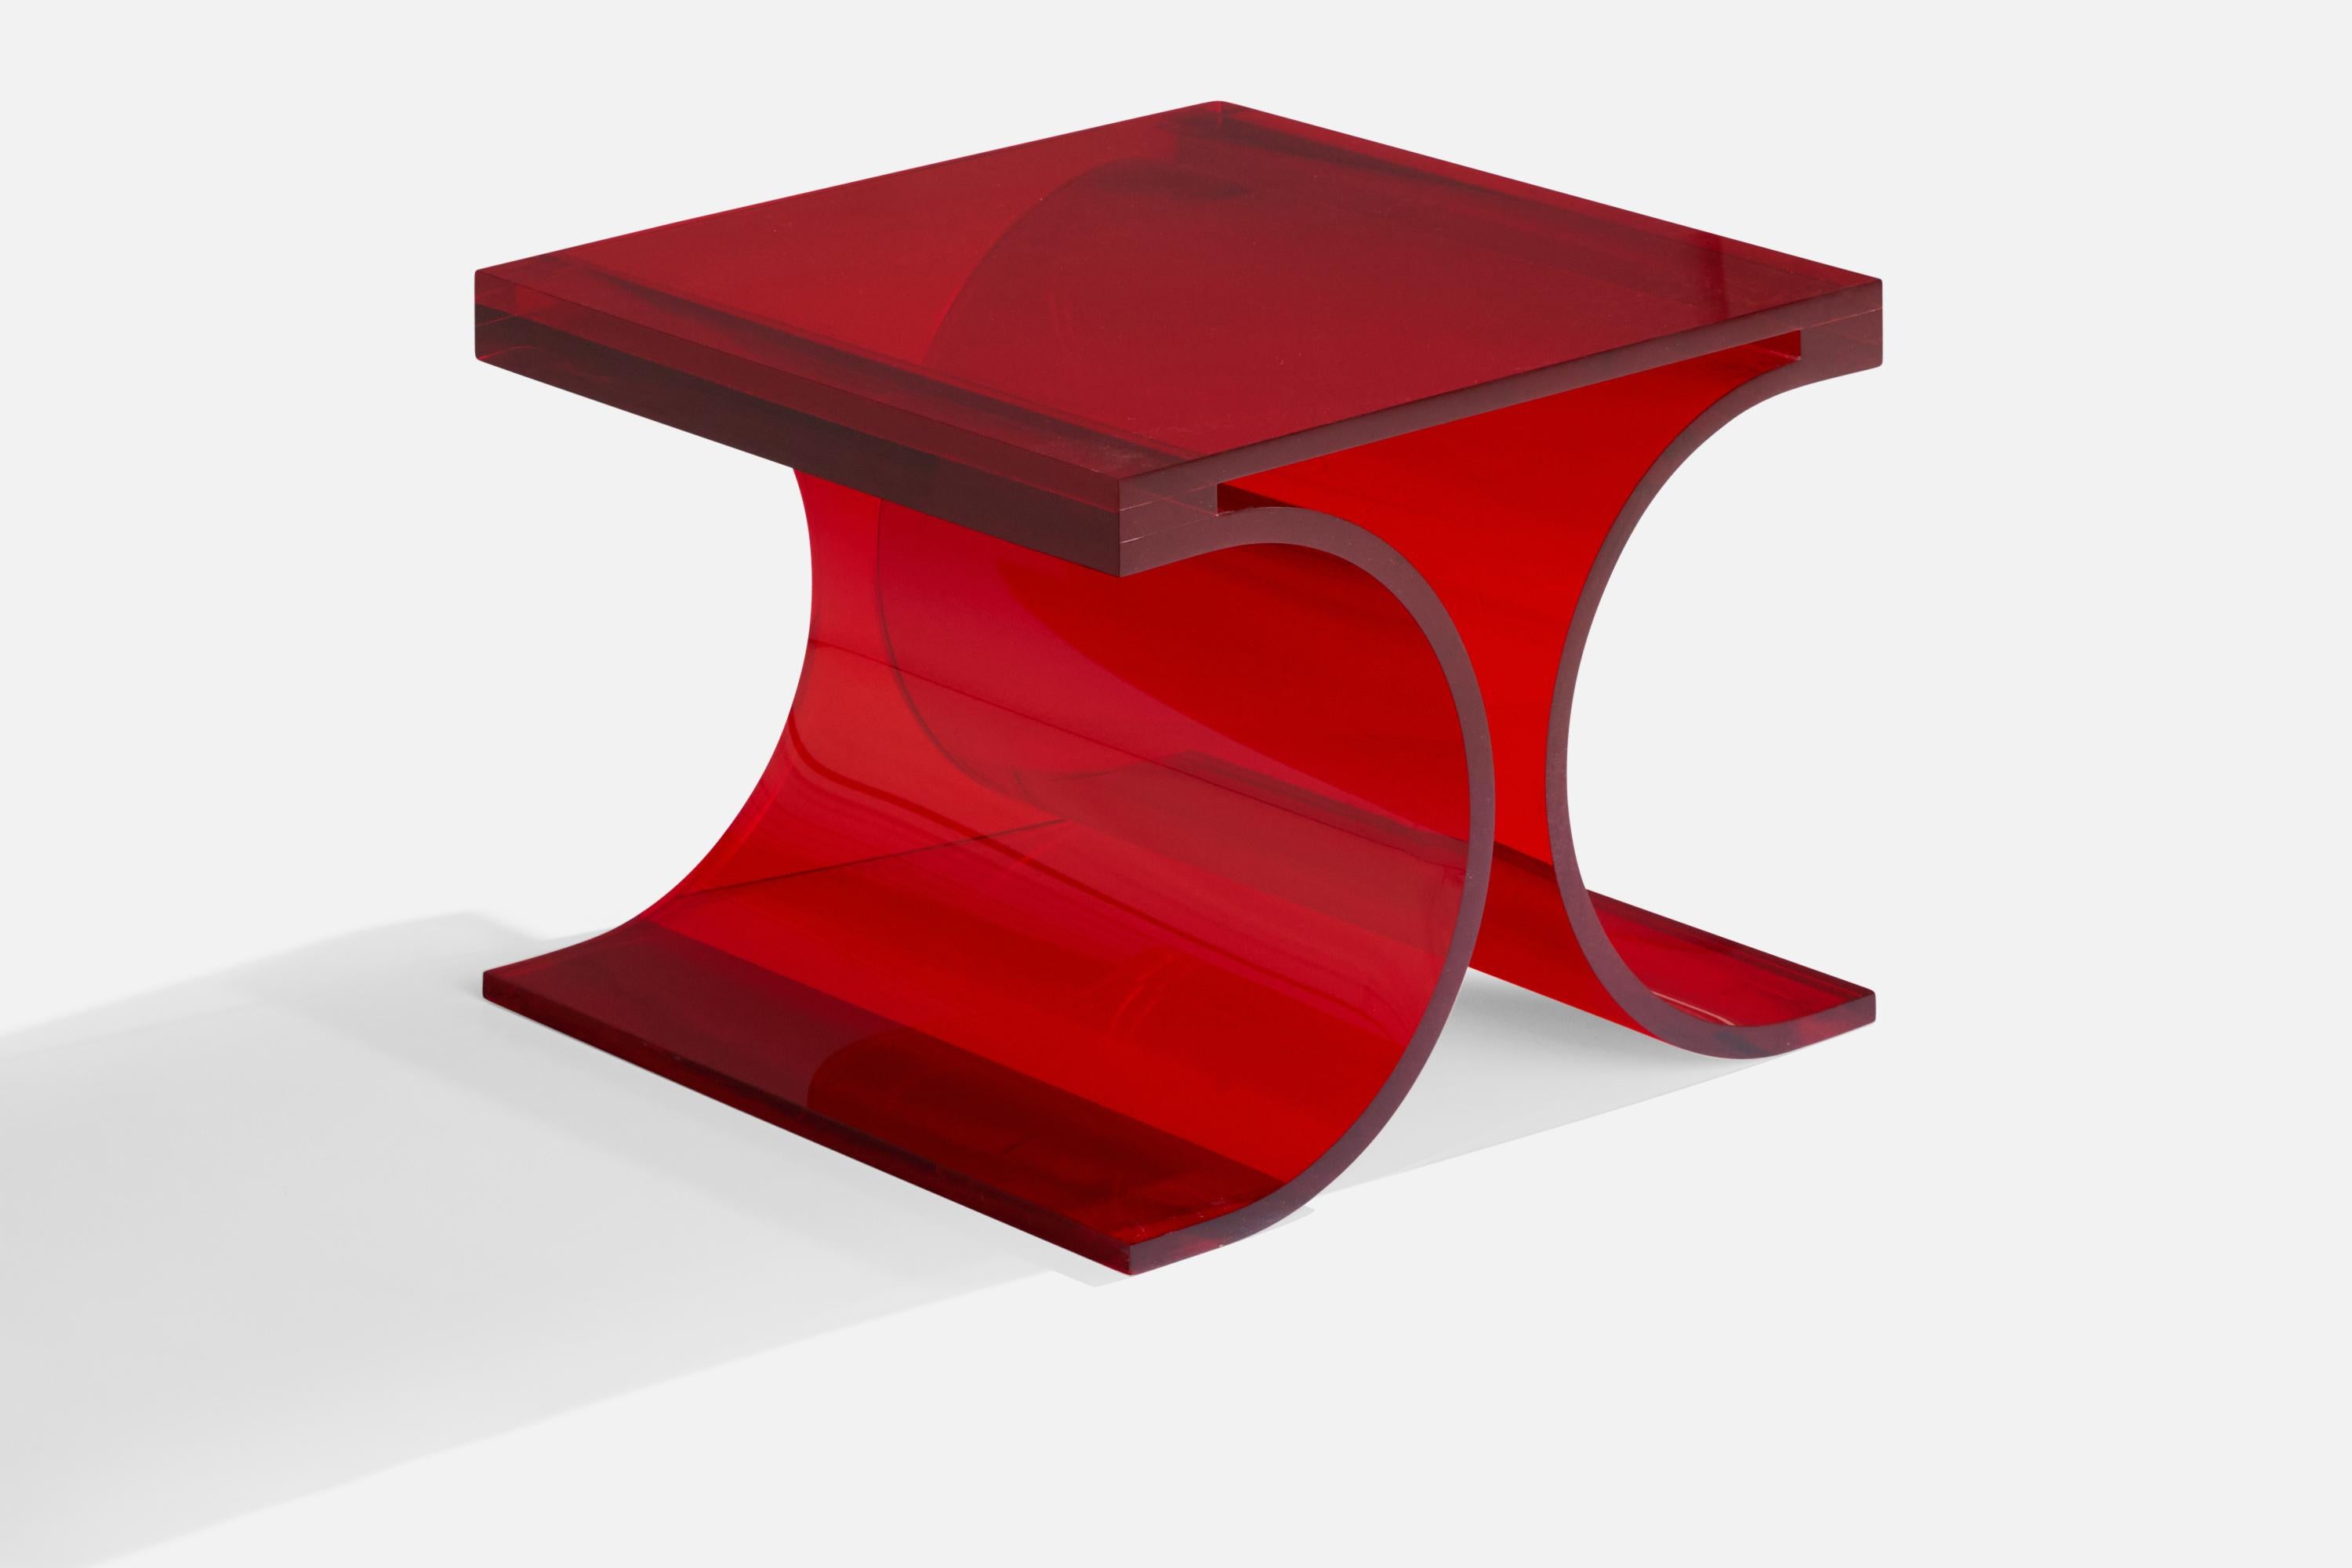 A prototype red altuglas side table designed and produced by Michel Boyer & Jean-Pierrre Laporte, France, 2009.

Produced for an exhibition at Silvera in 2009.
